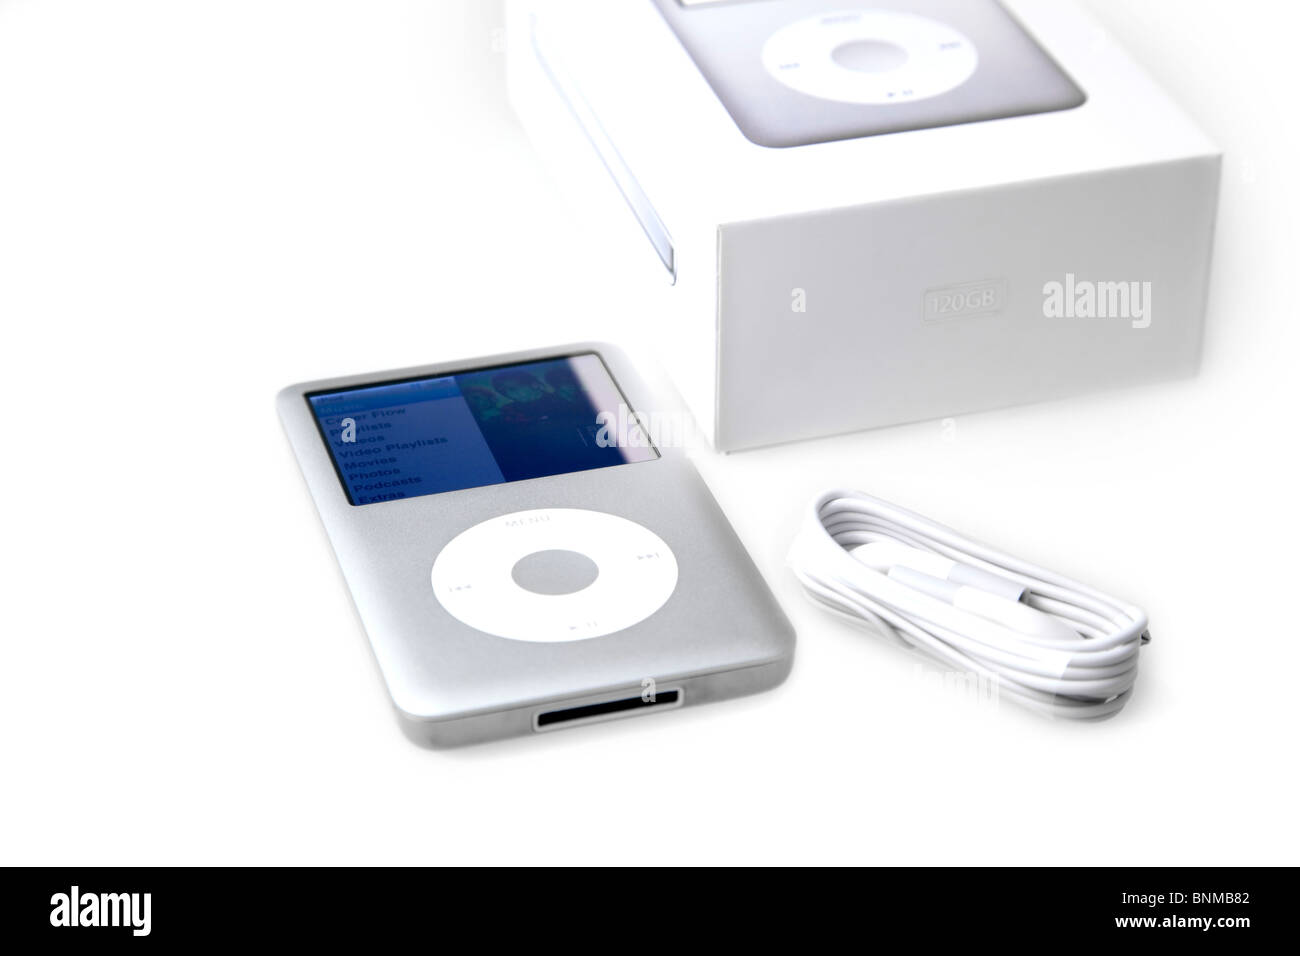 Music, Portable MP3 Player, Apple i-pod classic 120Gb. Music Player  Recorded Audio MP3 Personal Portable Pocket Silver Grey Gray Stock Photo -  Alamy